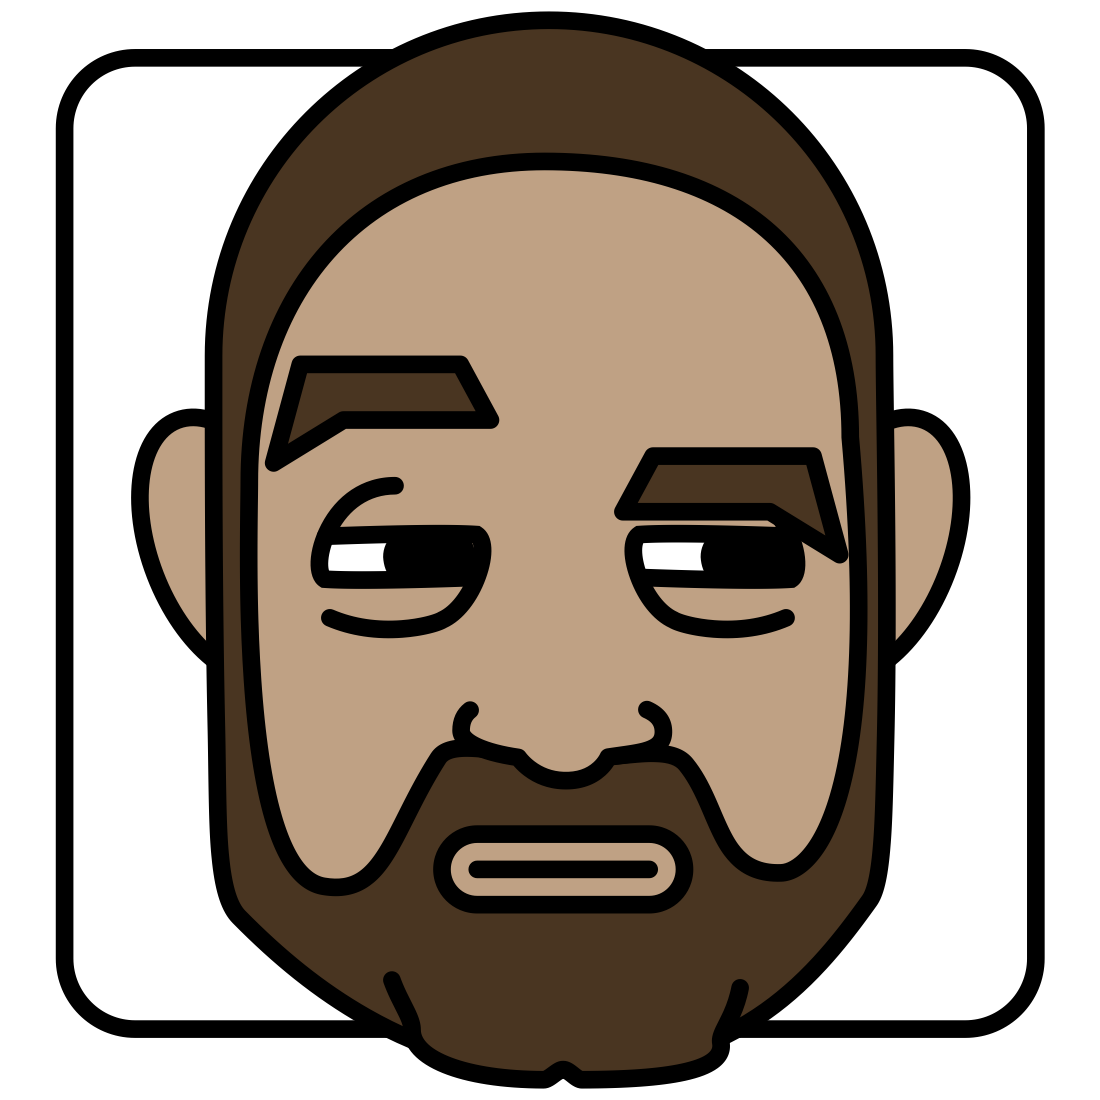 My new avatar, a self-portrait cartoon of me suspiciously looking to the left with a raised eyebrow. 